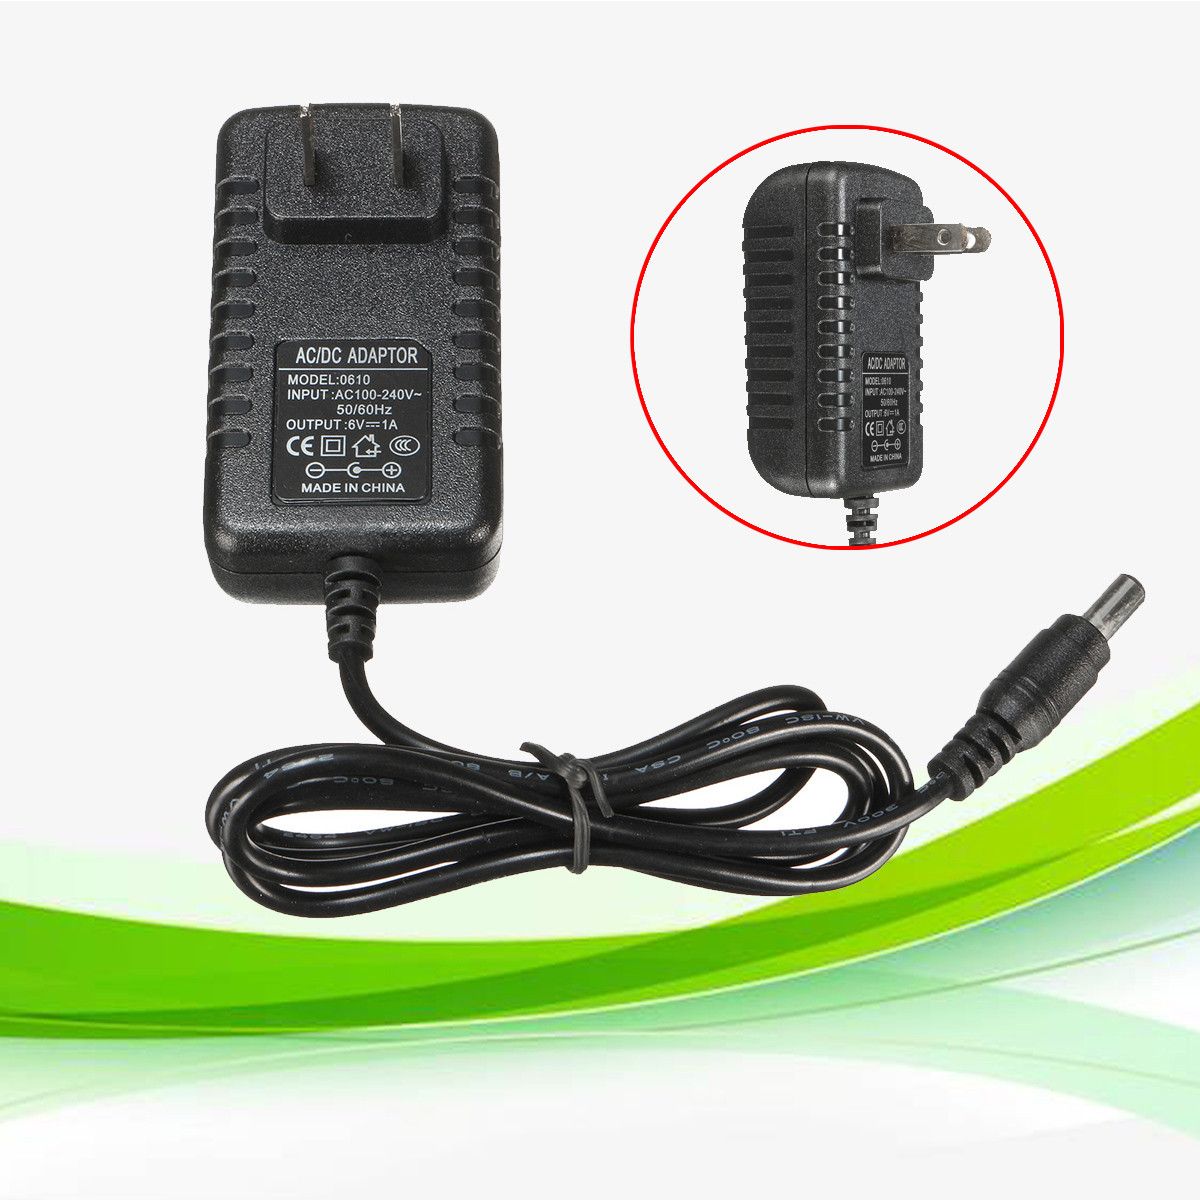 AC-100-240V-TO-DC-6V-1A-Adapter-Power-Supply-Transformer-US-Plug-Battery-Charger-1103549